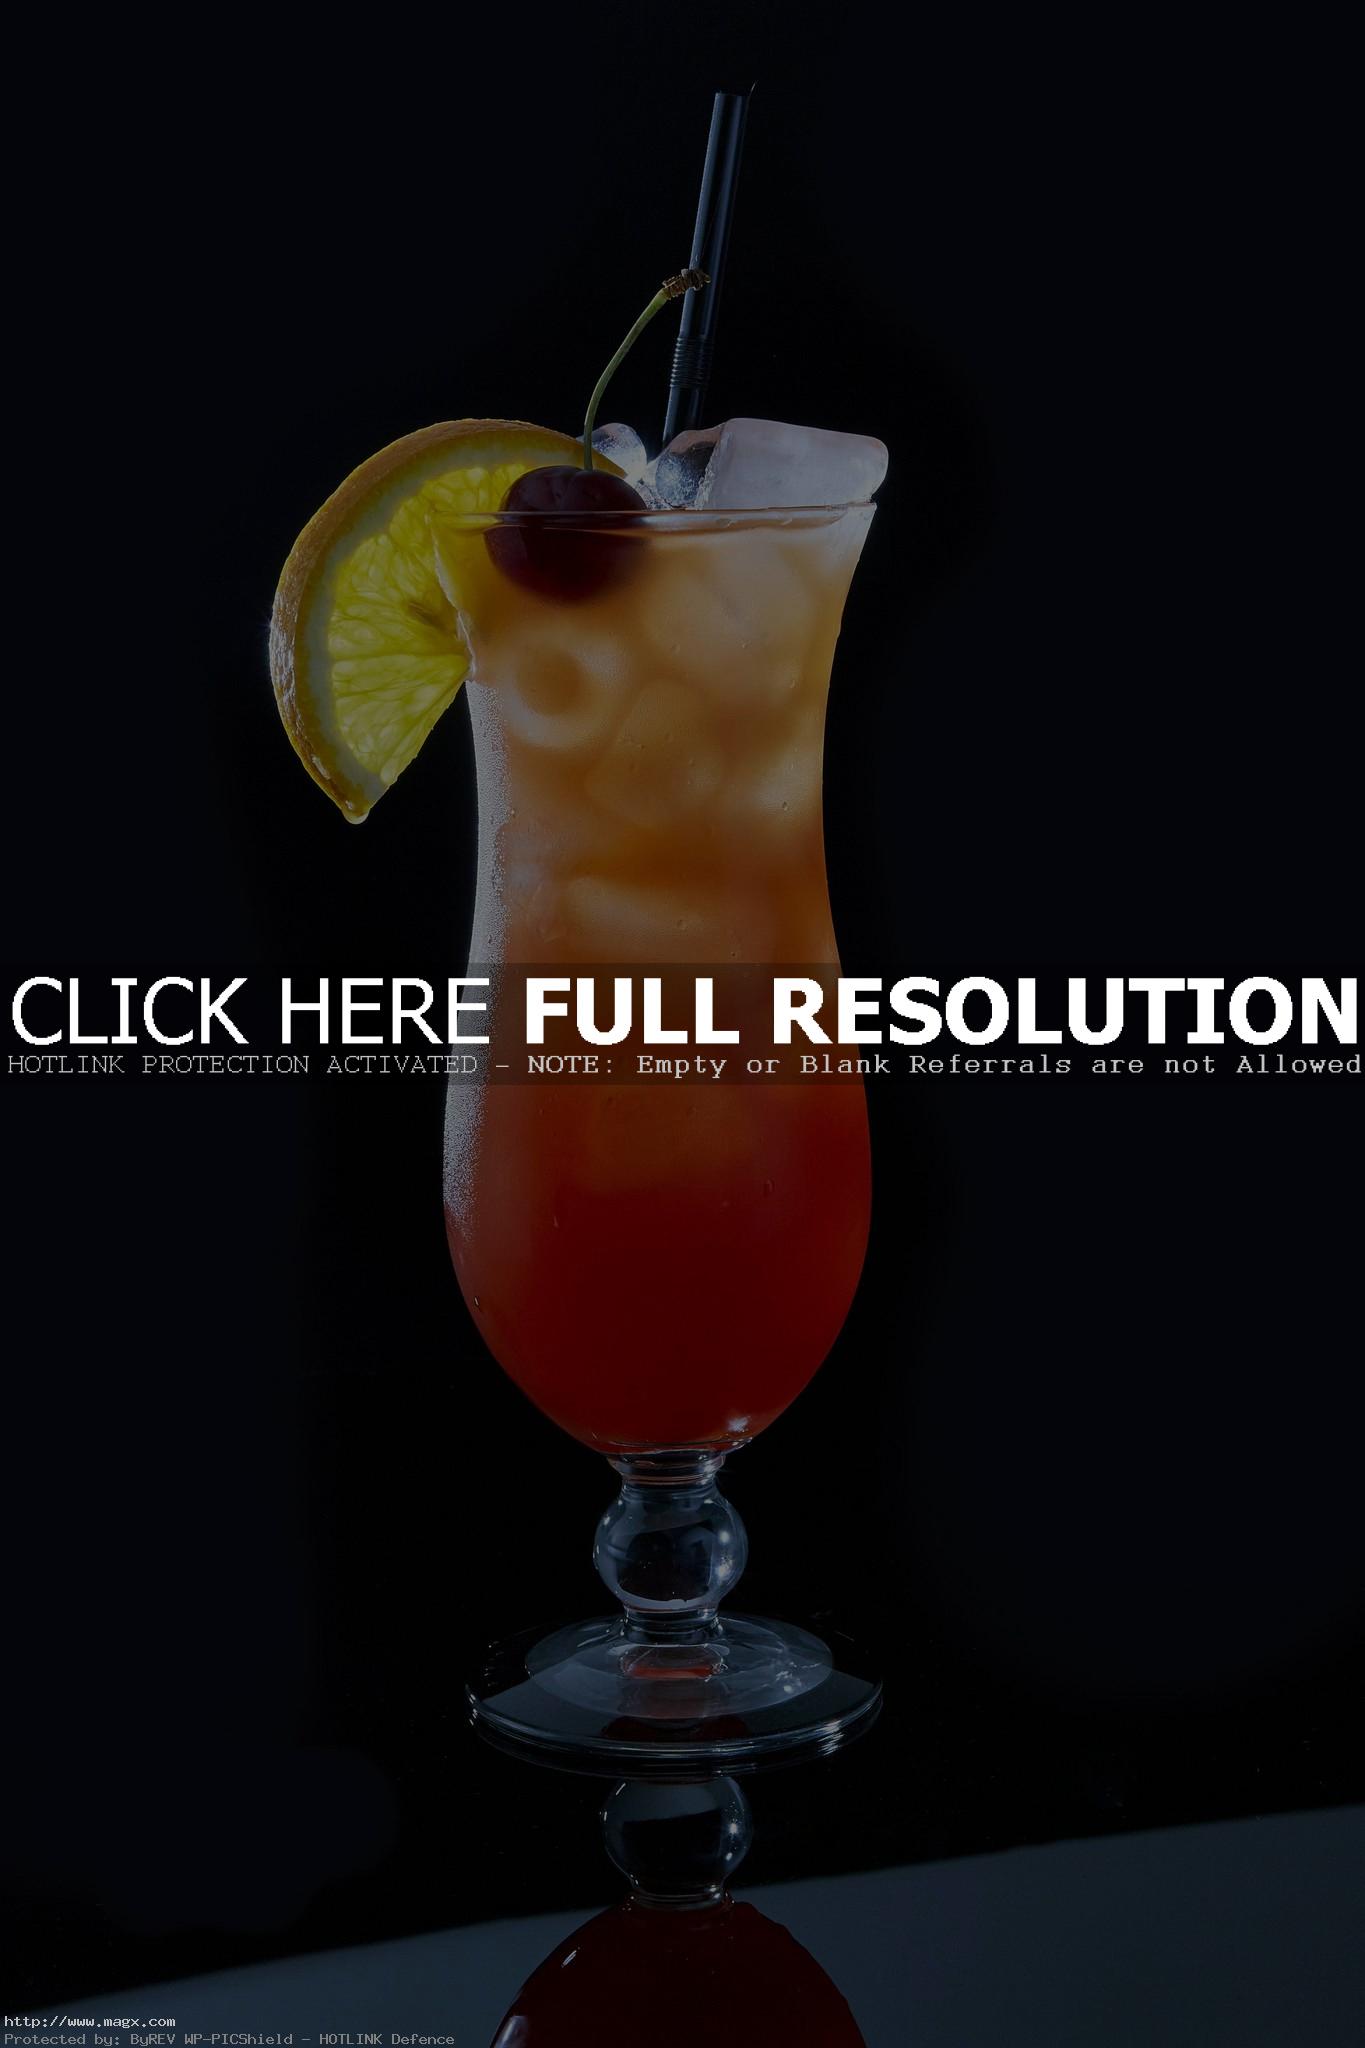 Hot Summer Cocktails and Drinks for 2016